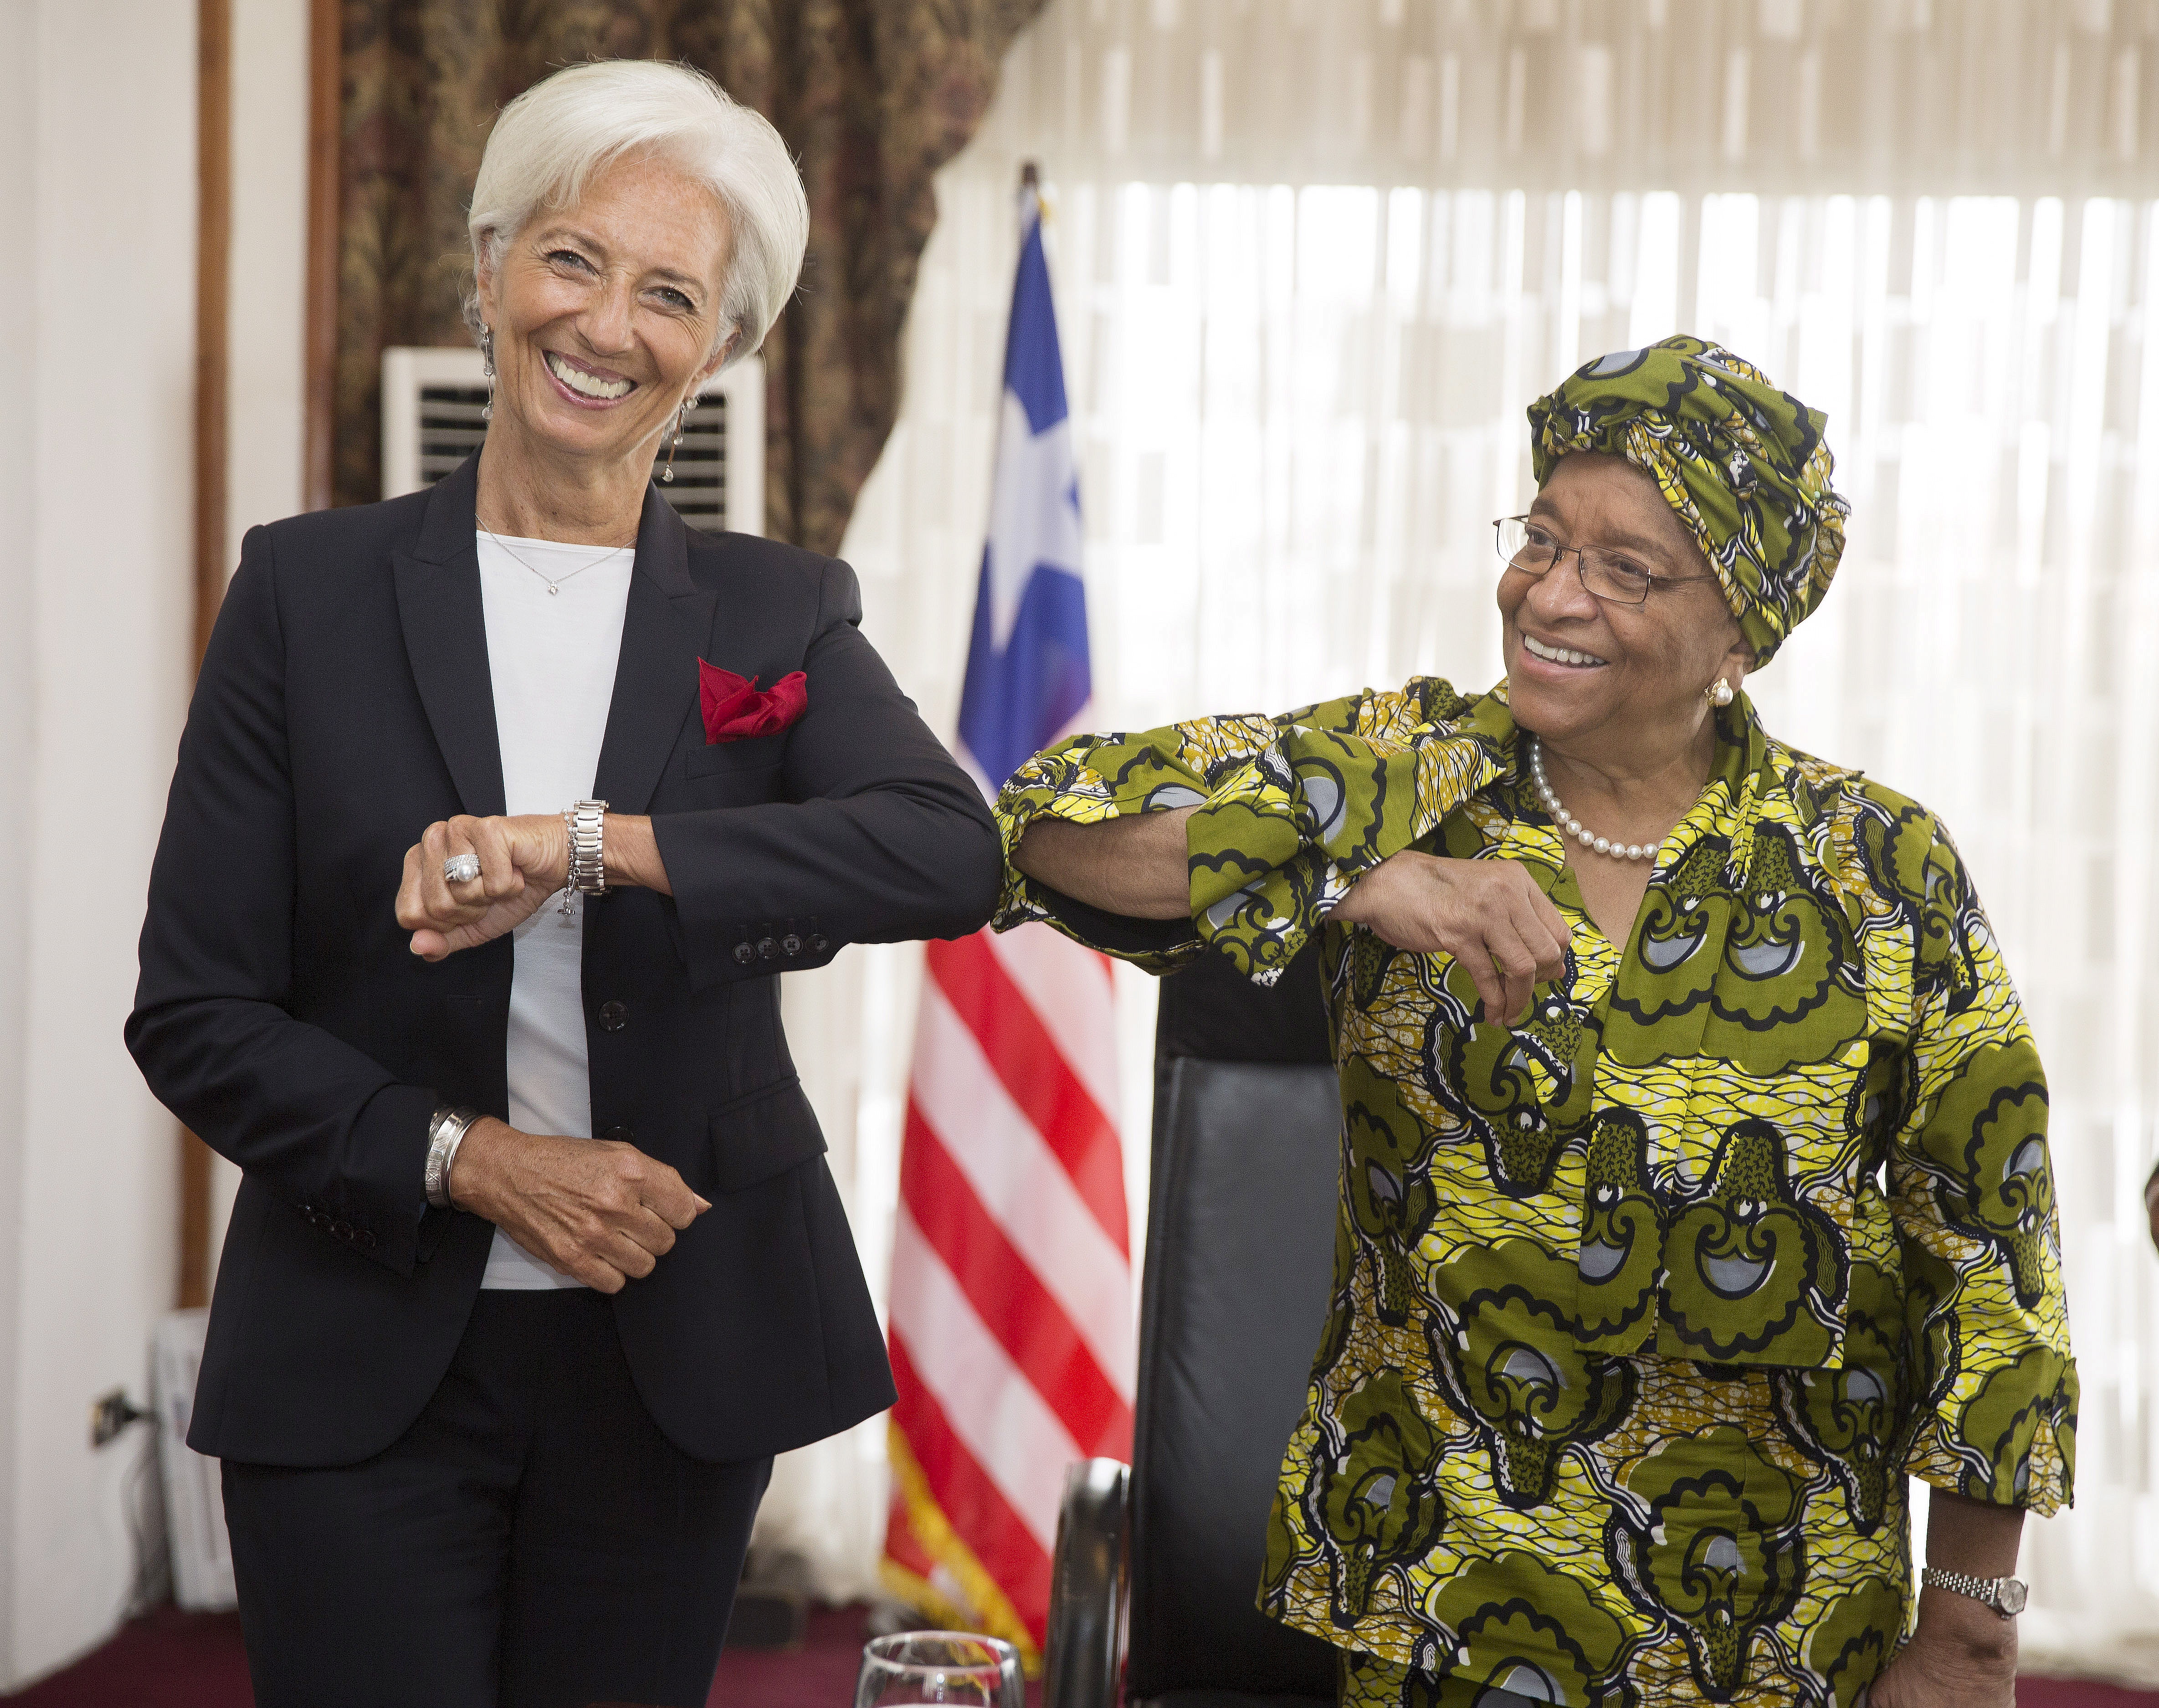 Africa in the news: J.P. Morgan expels Nigeria from bond index, IMF chief  Lagarde visits Liberia, and ICT project takes off in East Africa | Brookings